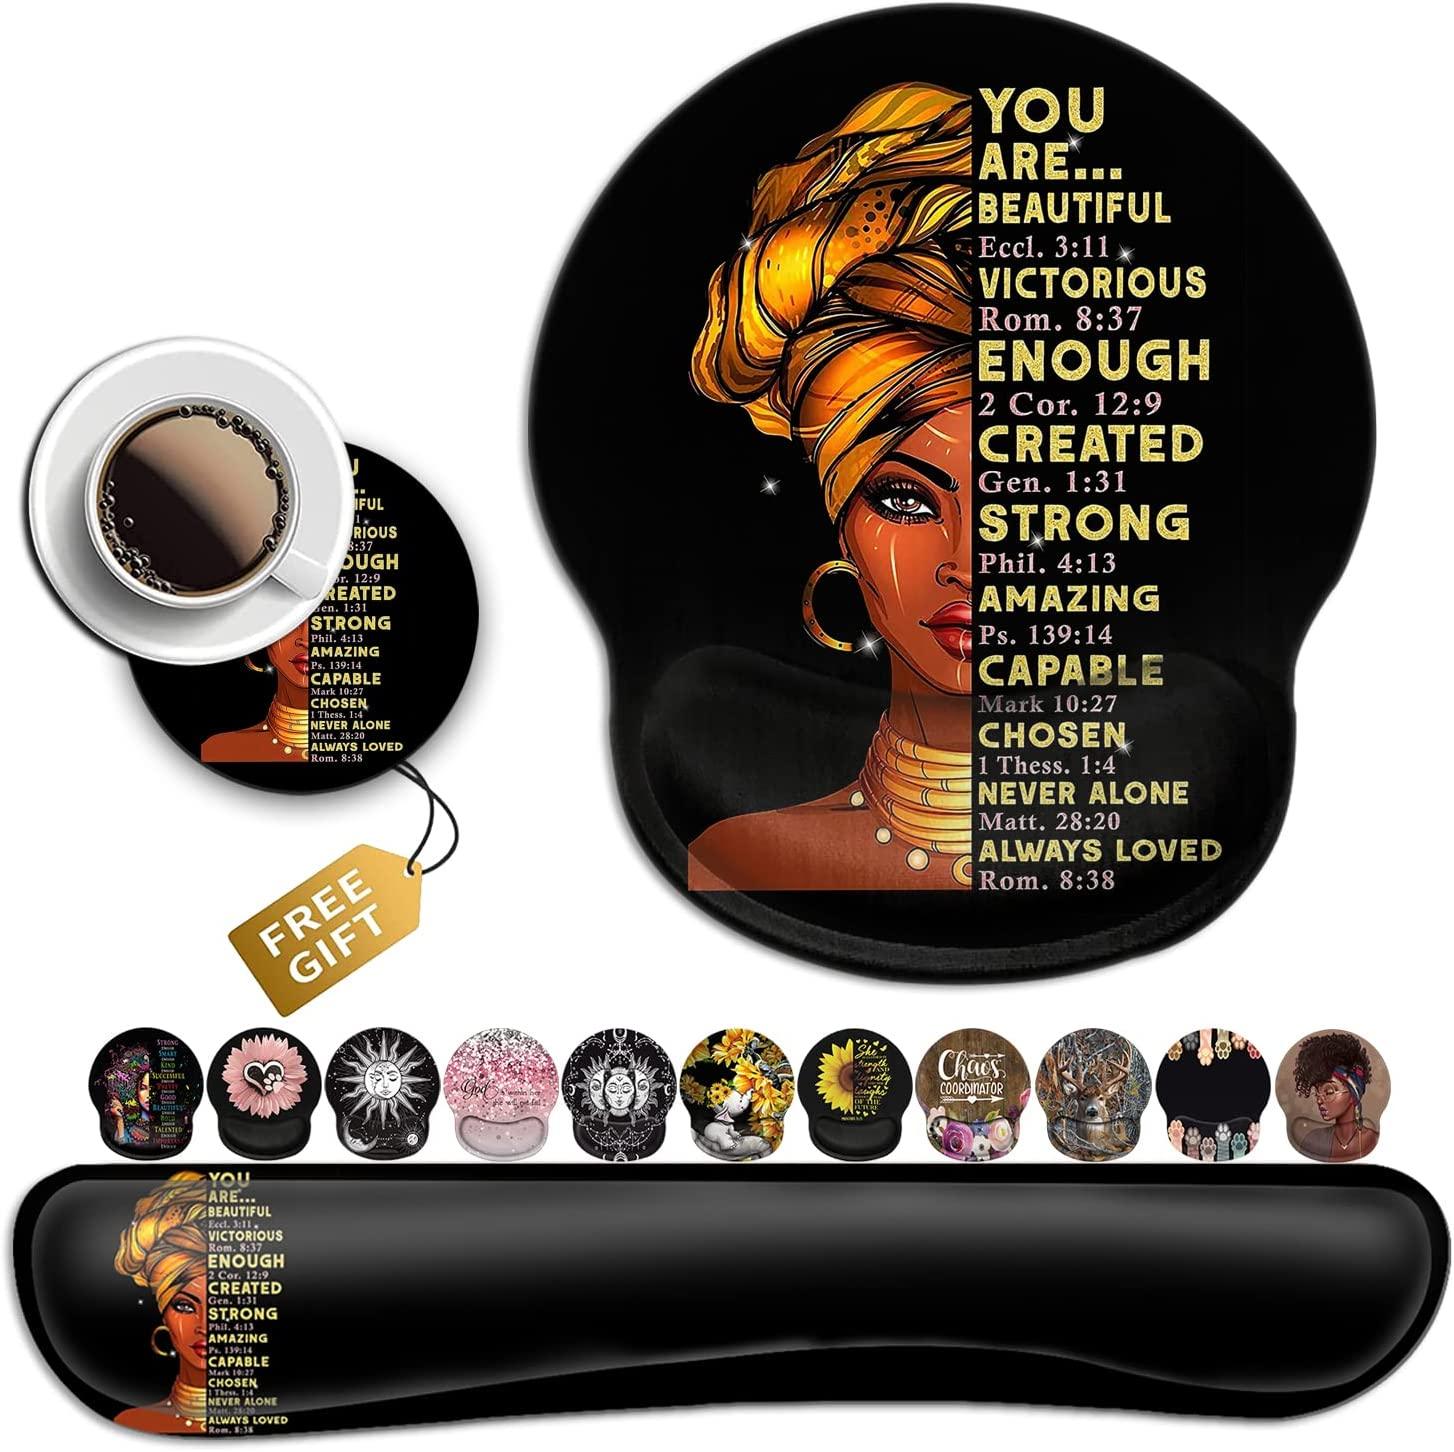 Black Mouse Pad with Stitched Edge Non-Slip Rubber Base, Office Accessories Desk Decor for Computers , Mouse Pad and Keyboard Wrist Guard Set,African American Wall Art Black Woman Queen Pattern